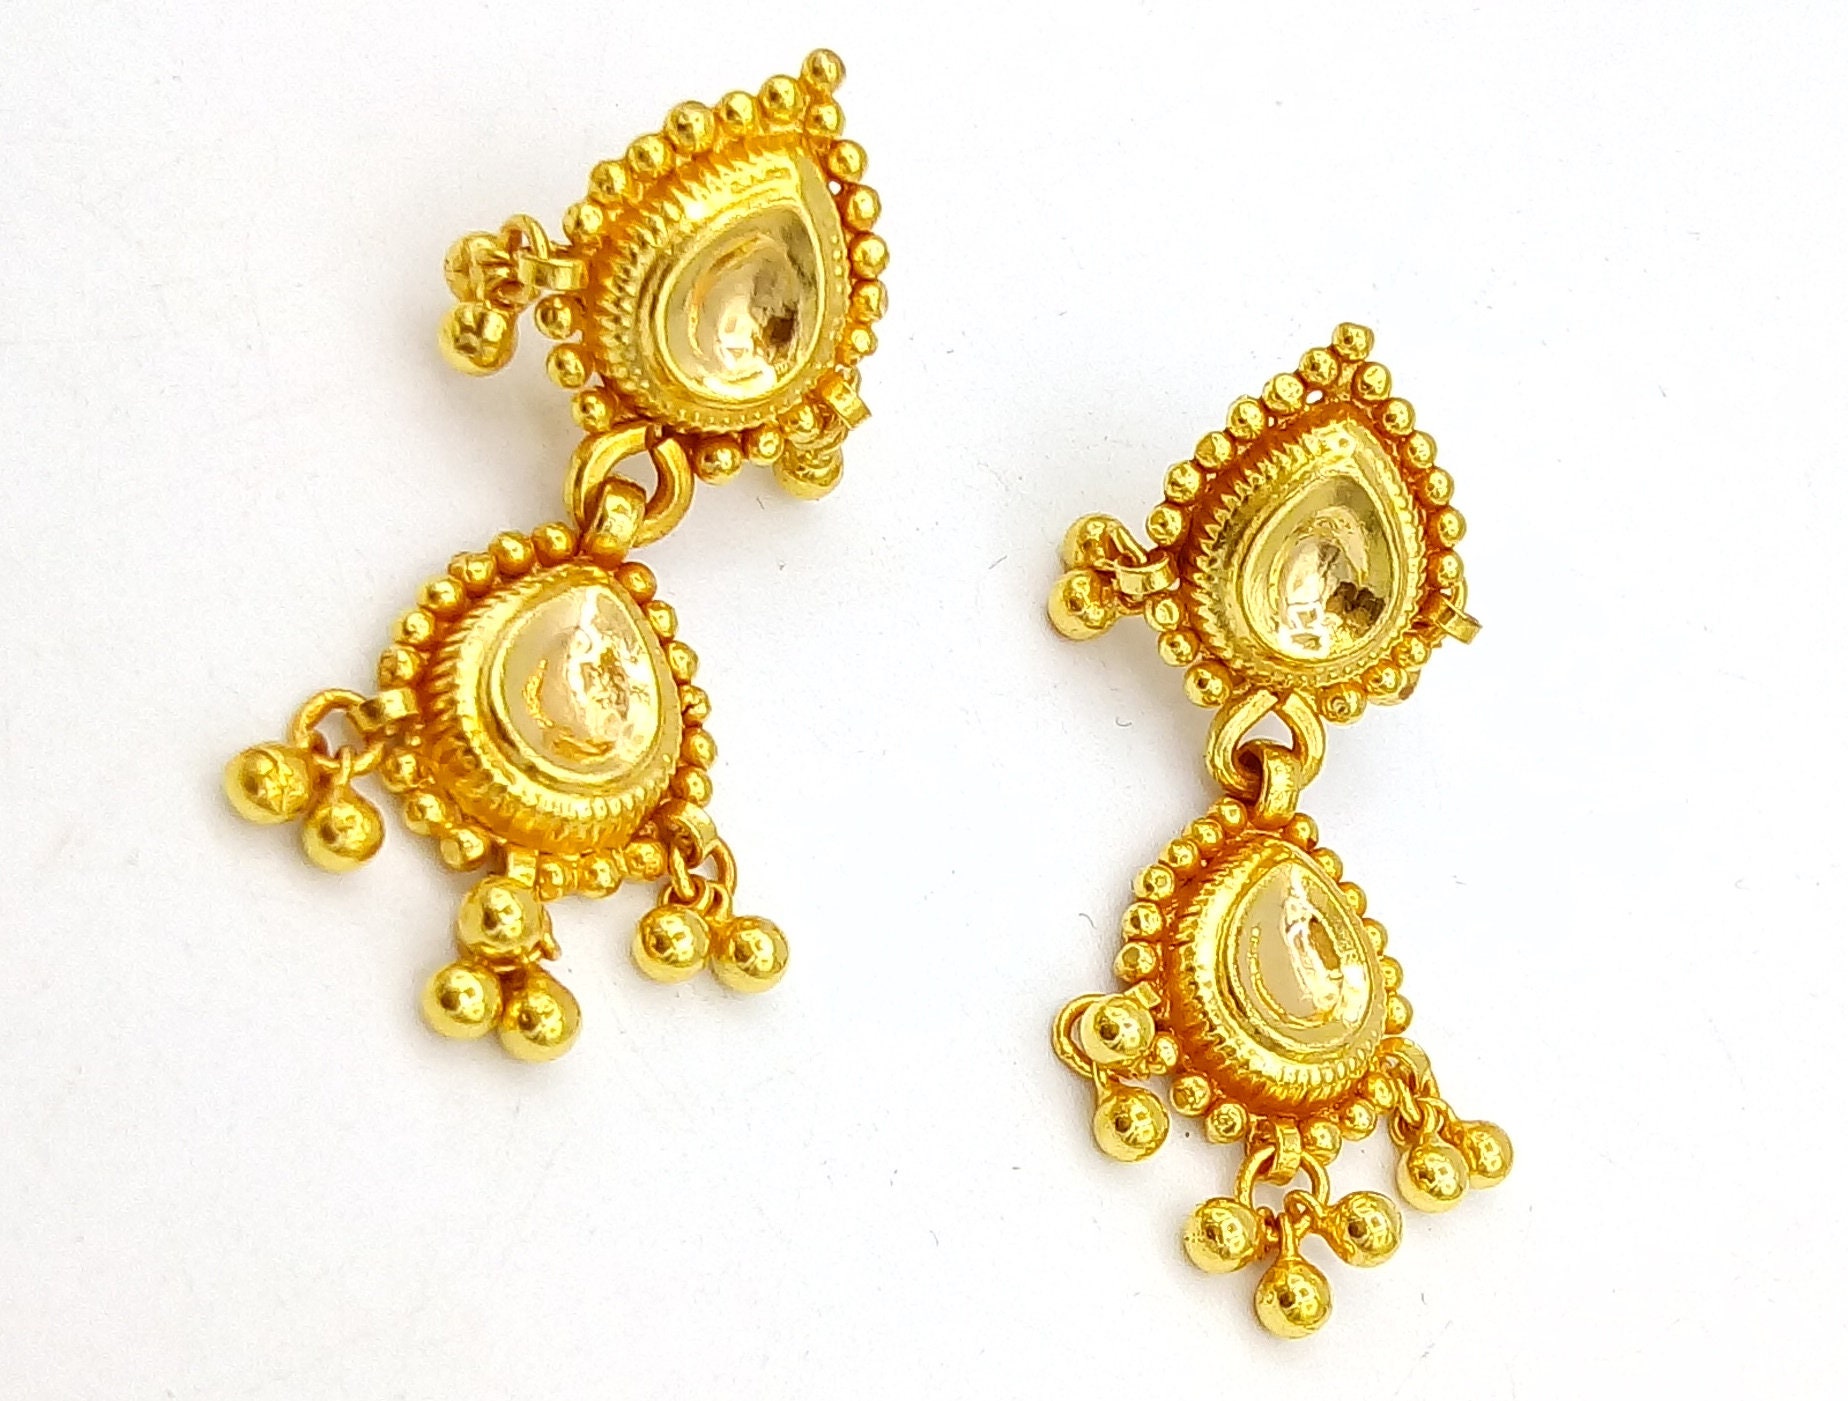 New Traditional 22K Certified Yellow Fine Gold 916 Stamped Hallmarked Earrings